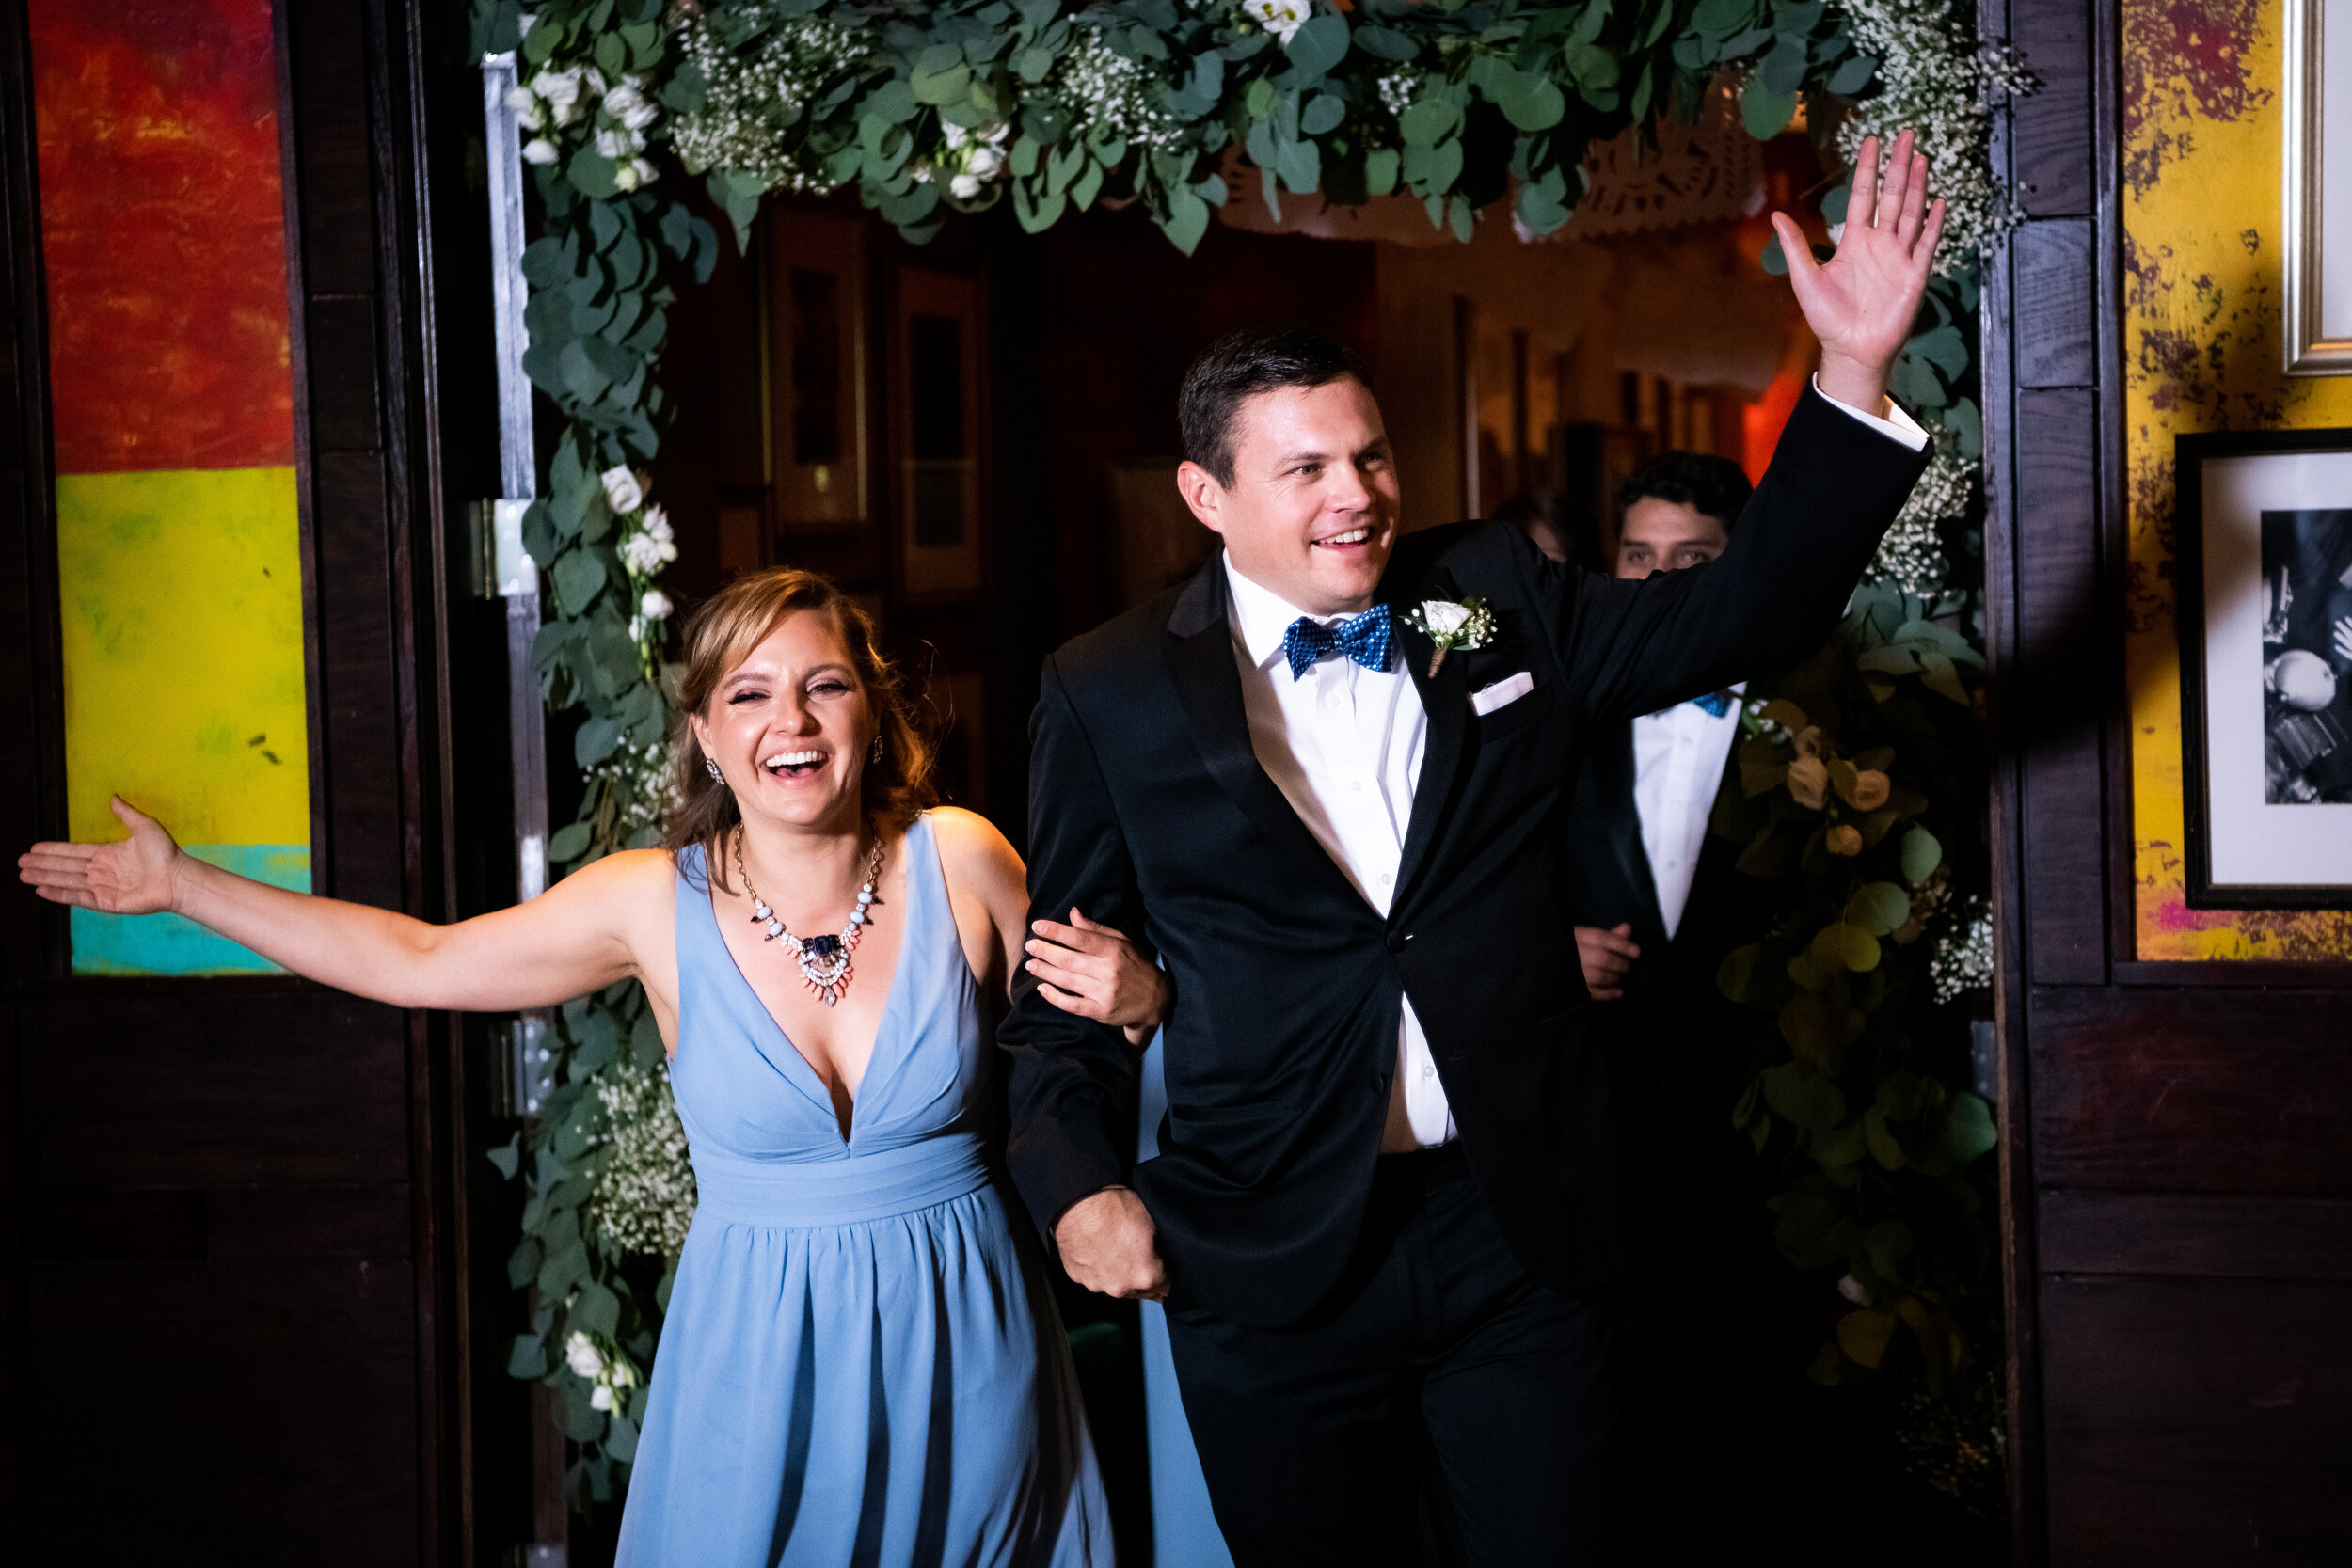 Wedding party introductions: Carnivale Chicago Wedding captured by J. Brown Photography